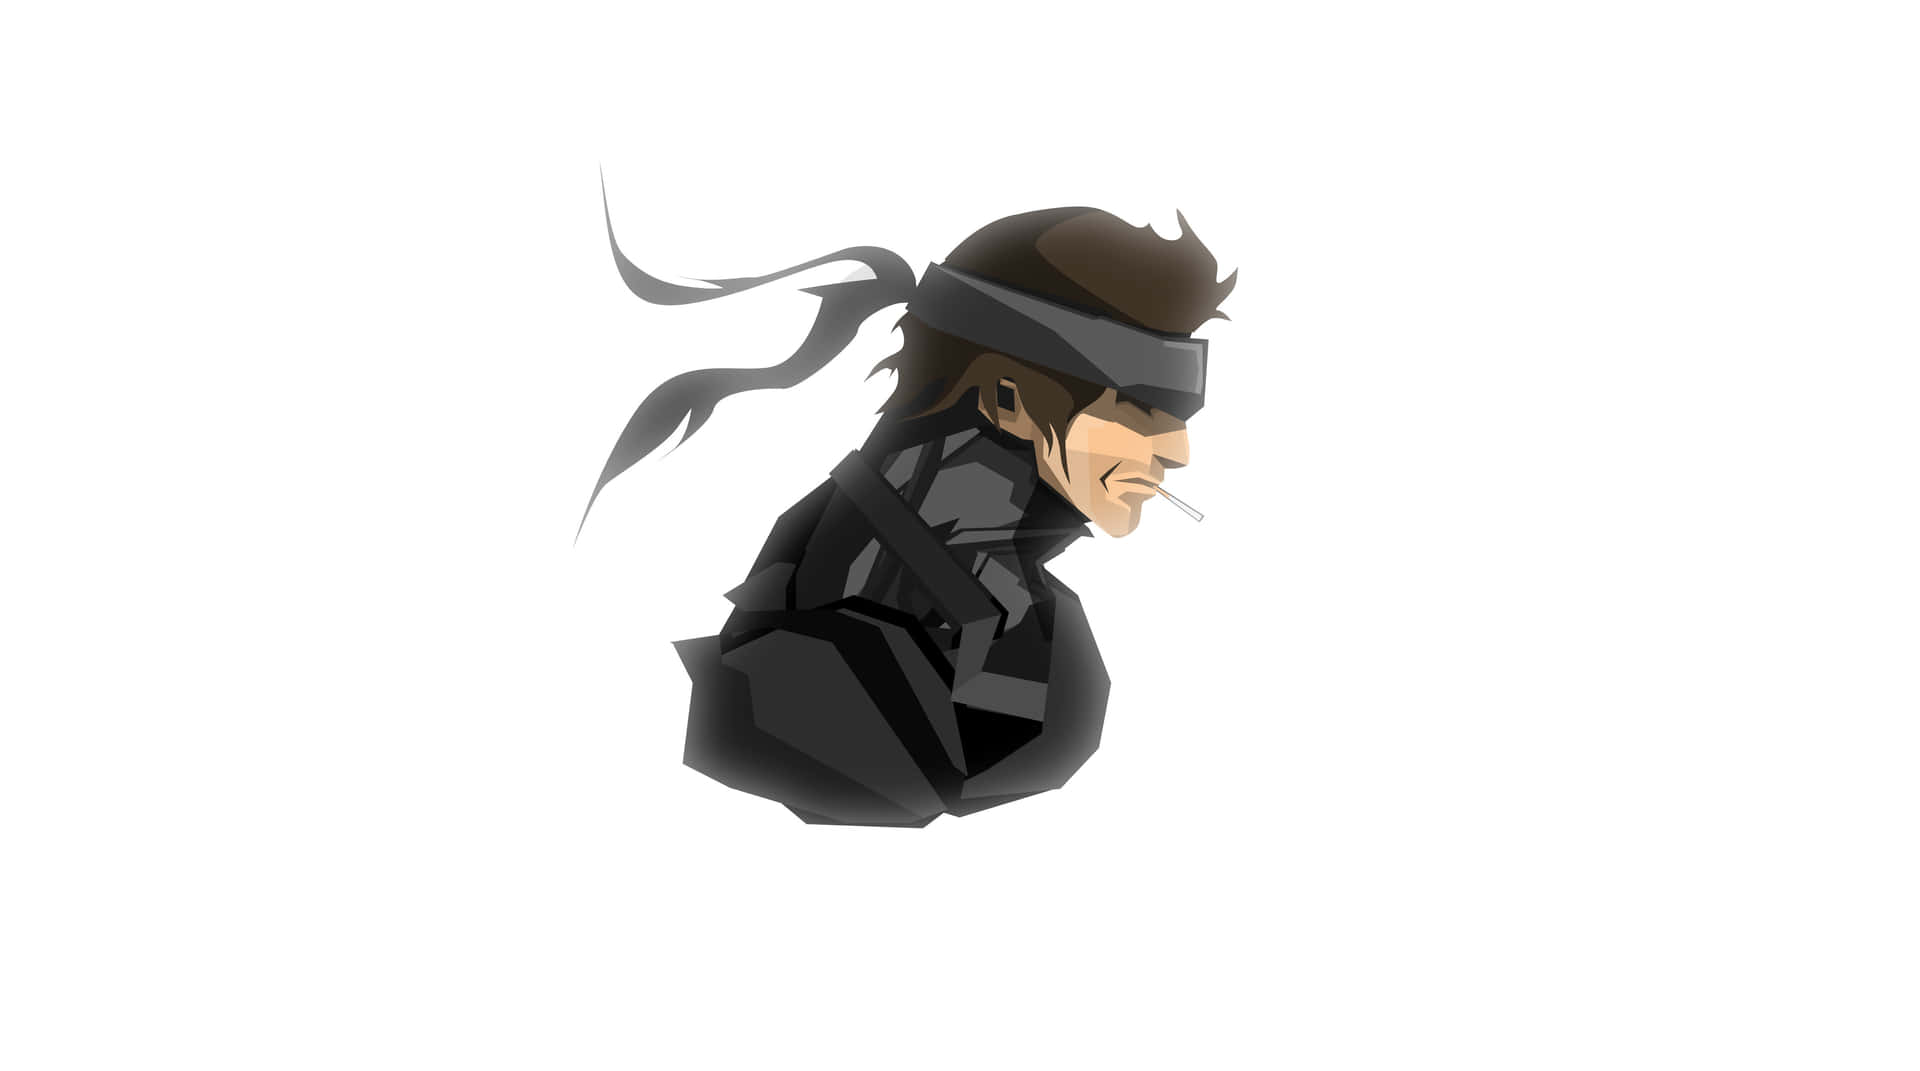 Get ready for your mission - Solid Snake in Metal Gear Solid Wallpaper